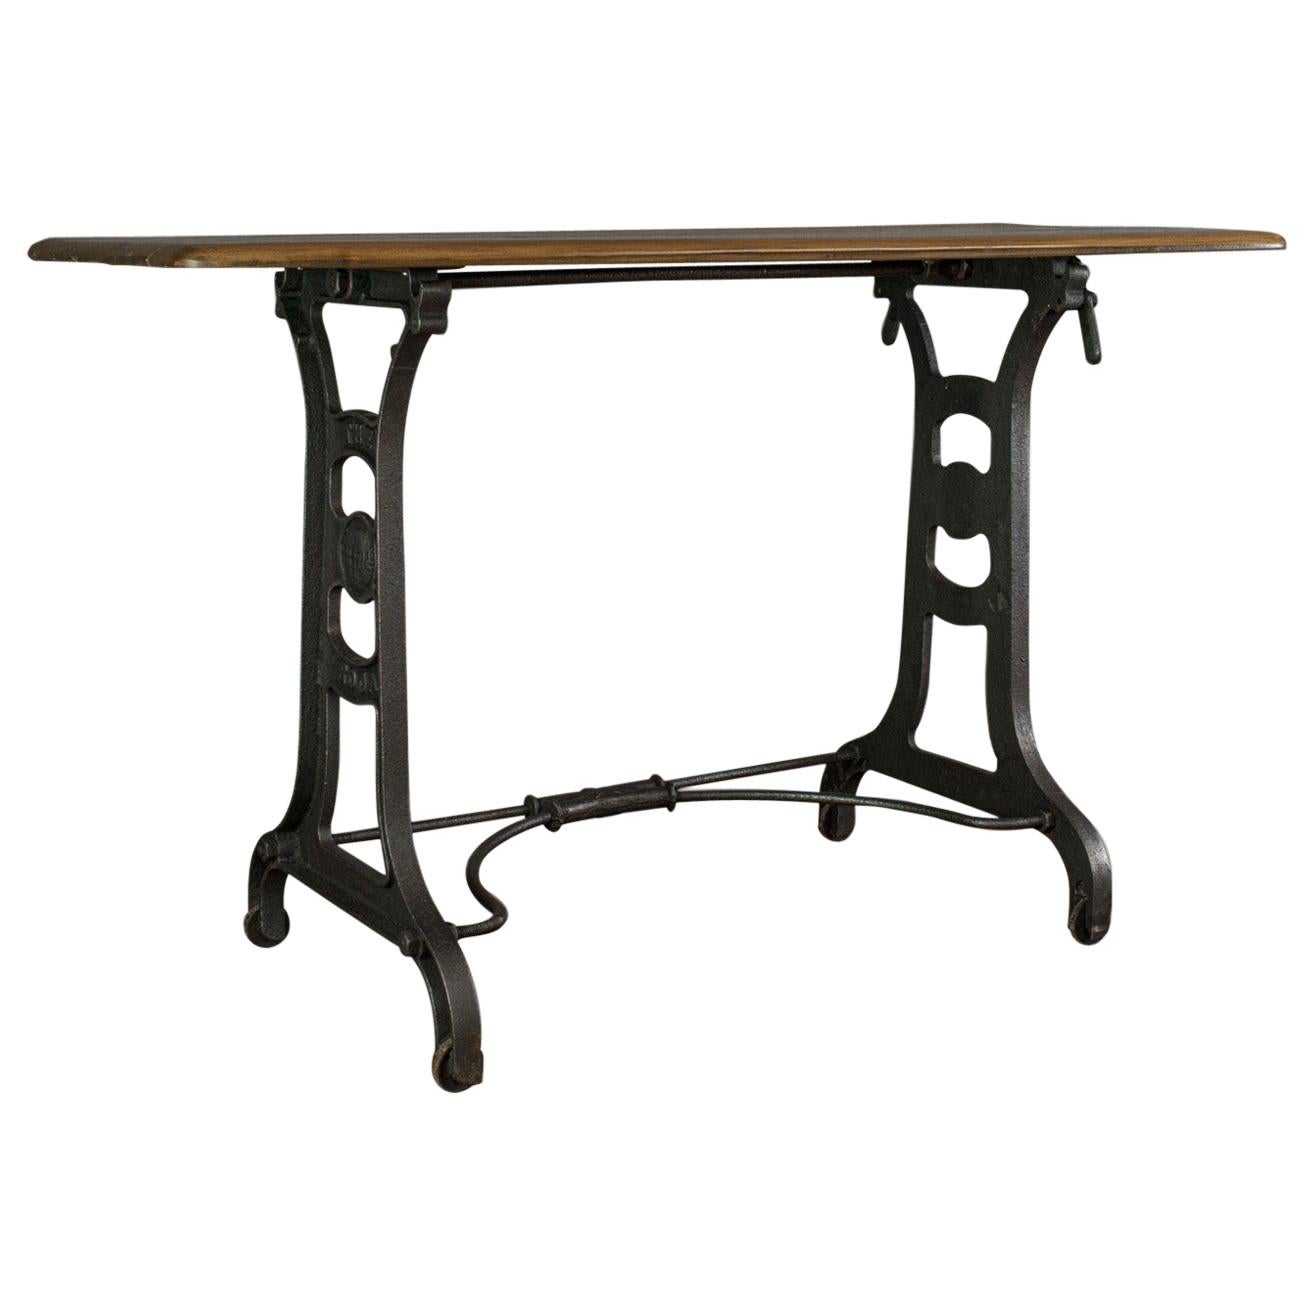 Orangery Table, English, Industrial, Machinist, Victorian, Side, circa 1900